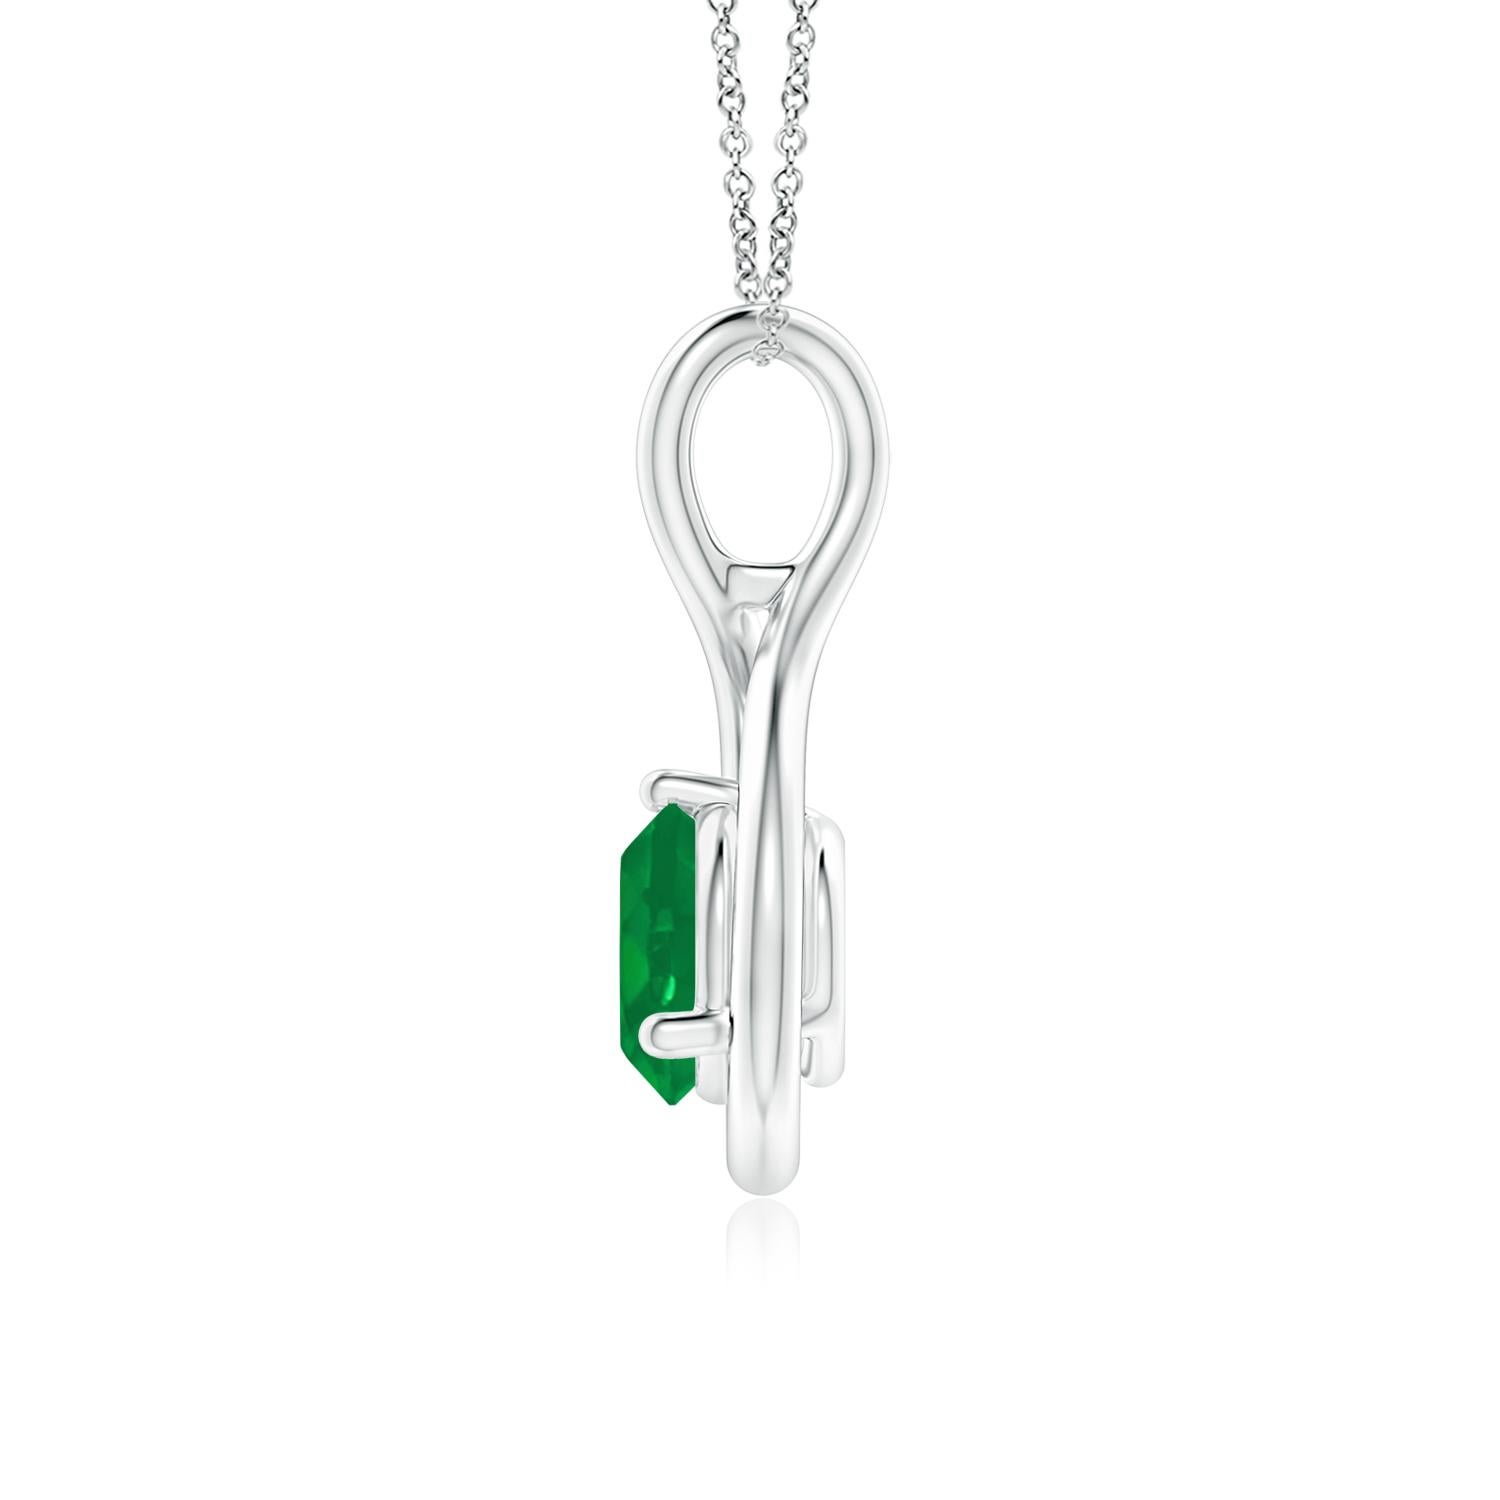 Nestled within a graceful infinity loop is a prong-set solitaire emerald that draws the eye with its lush green hue. The fluid elegance of this lustrous 14k white gold infinity twist pendant evokes a feminine vibe.
Emerald is the Birthstone for May